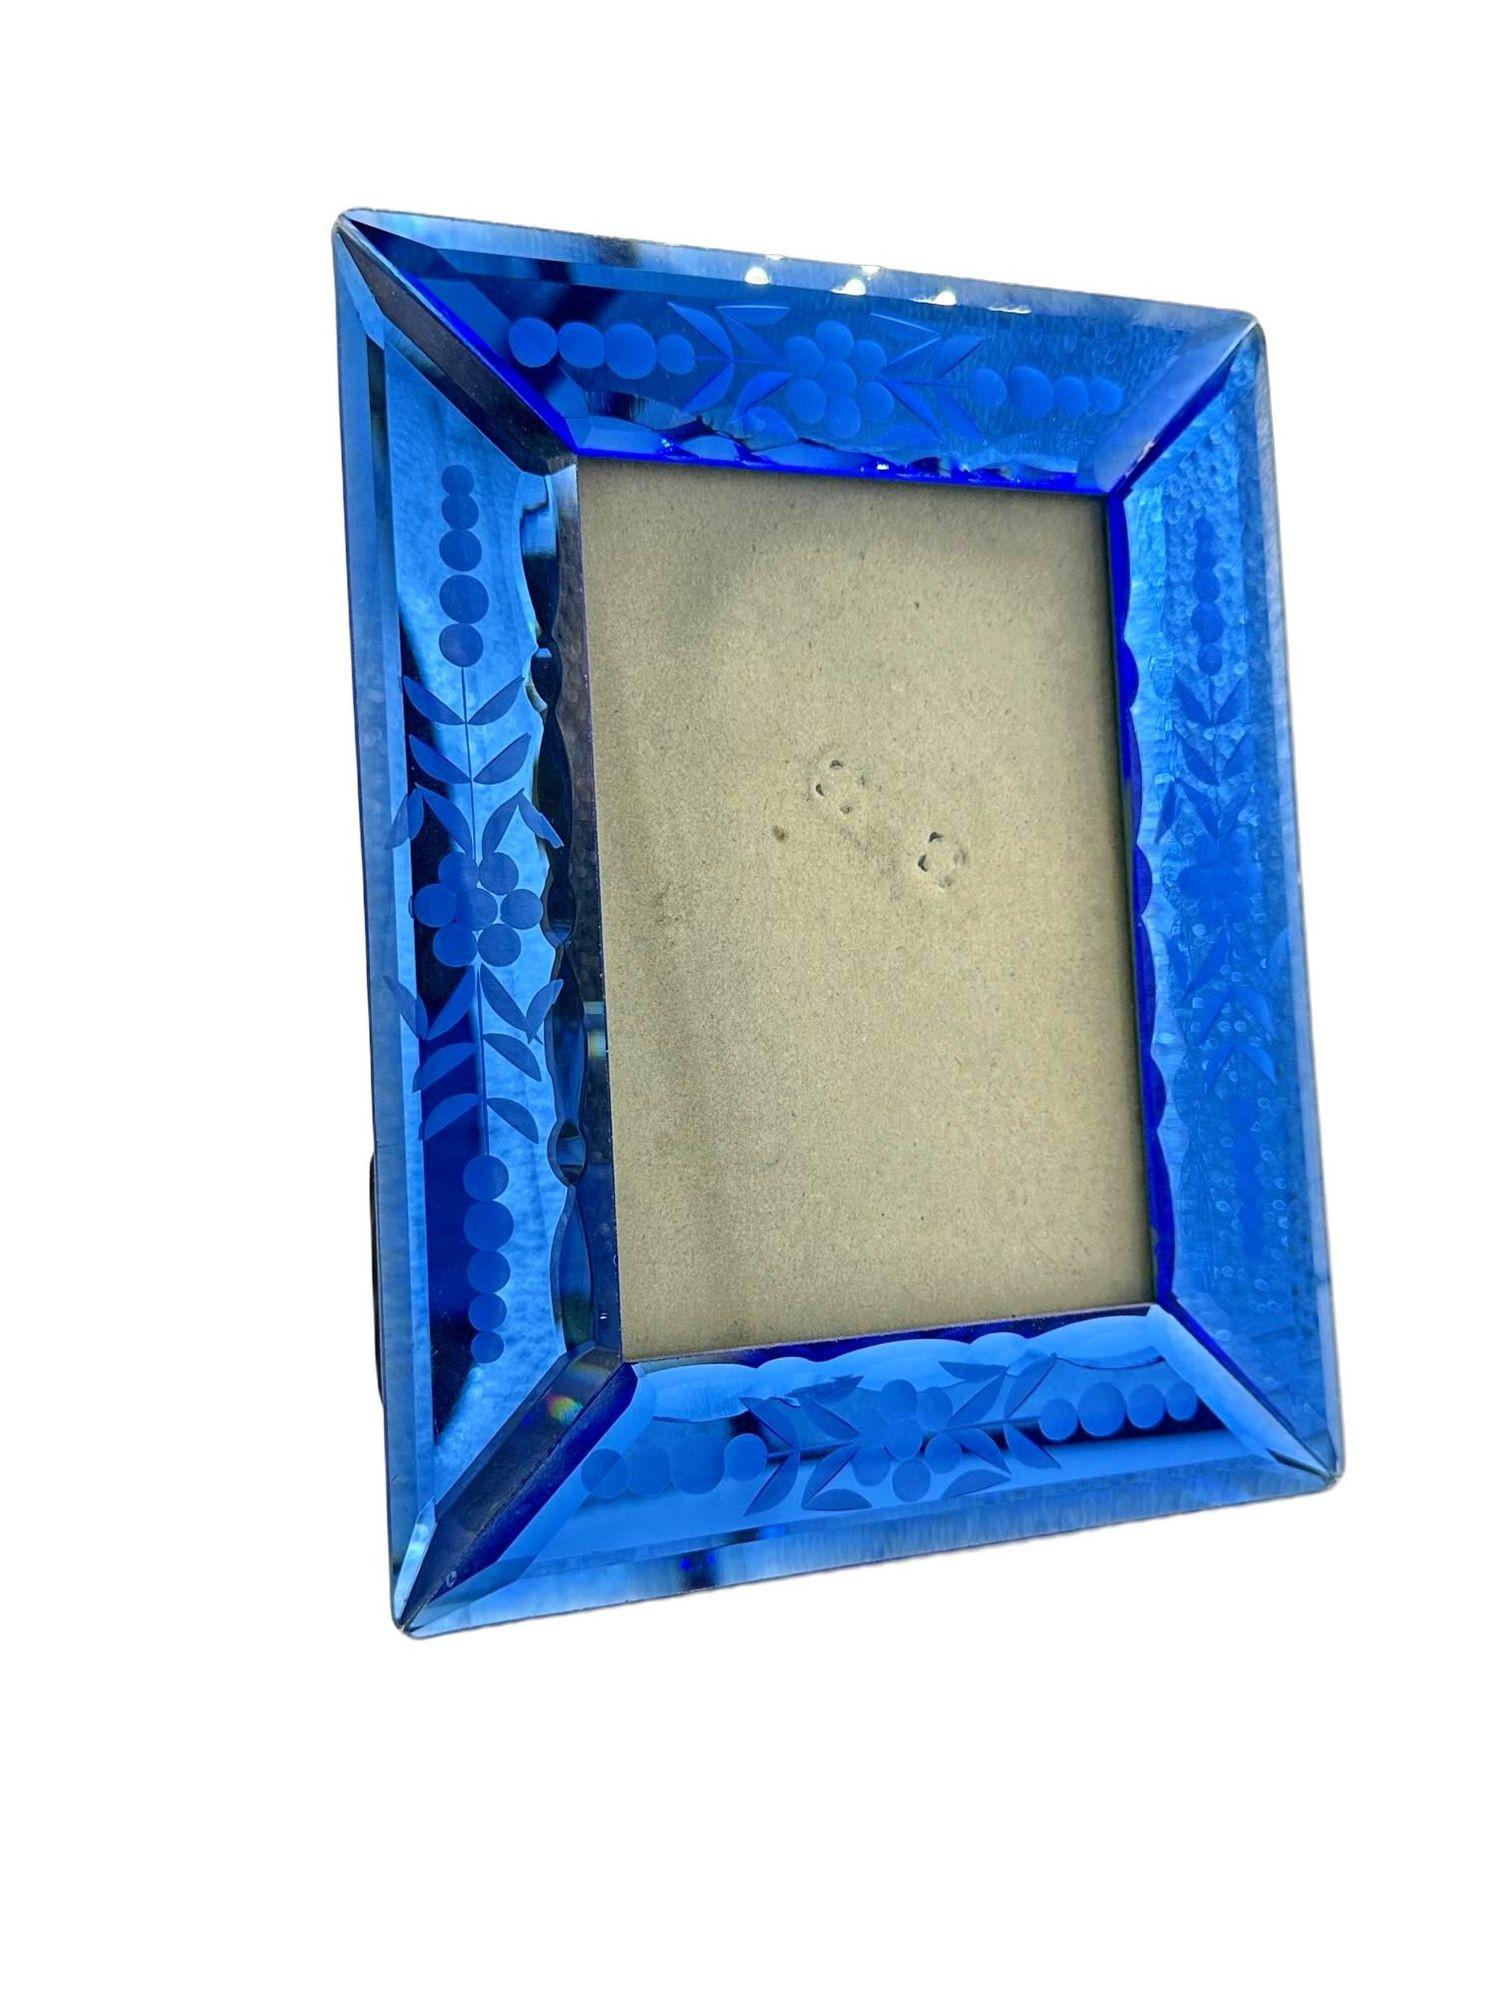 A vintage cobalt blue glass picture frame with floral etchings, Cobalt blue is a vibrant and intense blue, reminiscent of the deep blue color of cobalt salts. It has a rich and saturated appearance, often described as bold, striking, and vivid. When